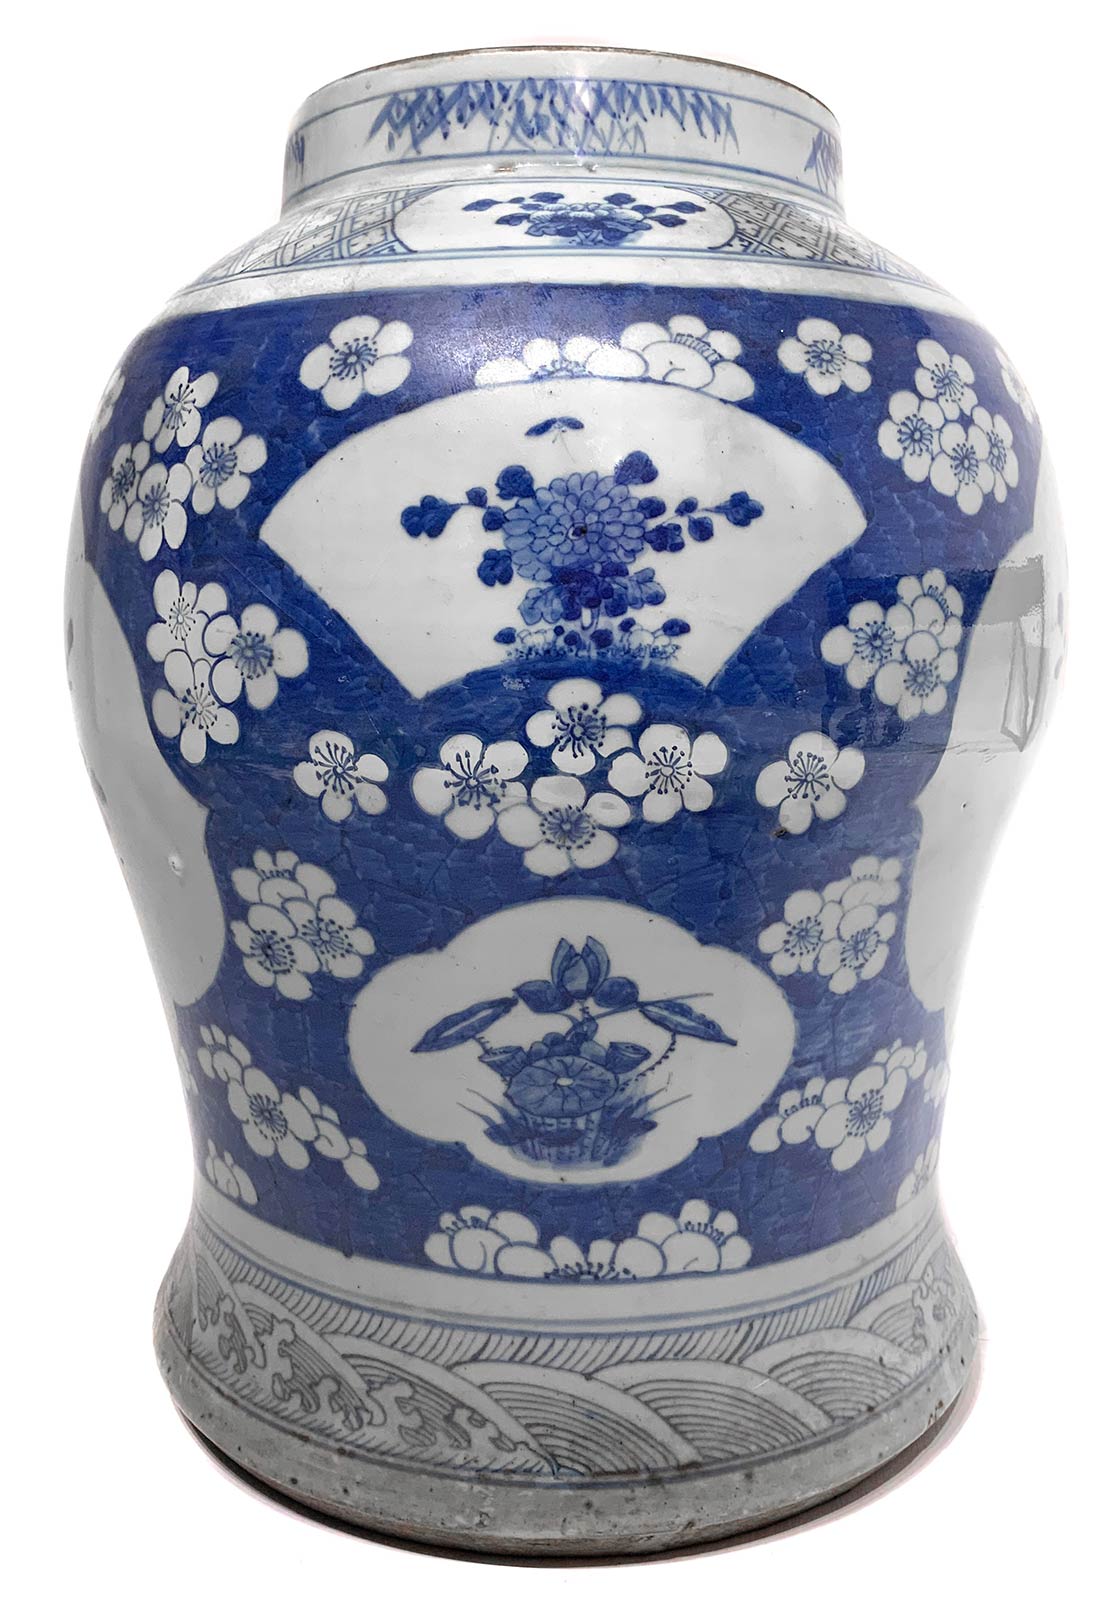 Vase with floral decoration and birds in white and blue. China. H 47 Cm, Cm base 3, Mouth Cm 20 - Image 2 of 3